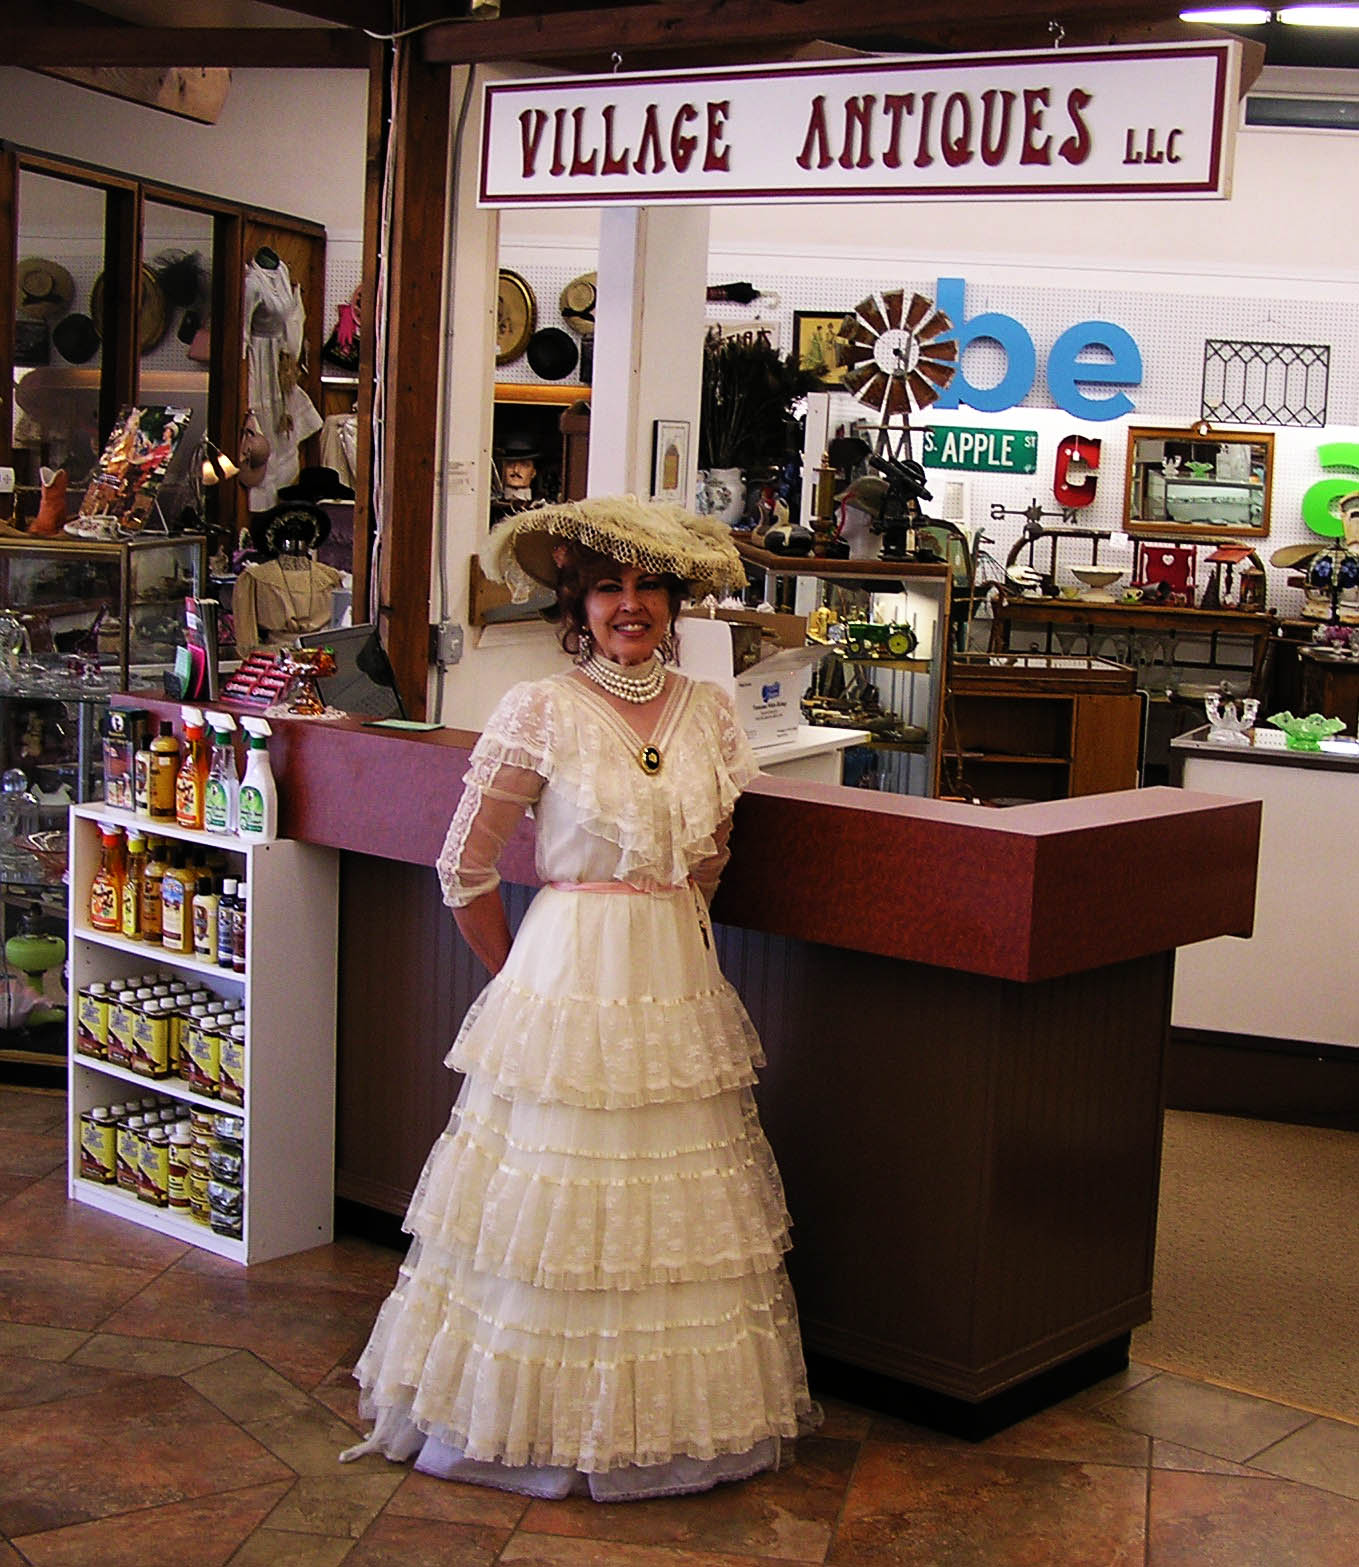 Village Antiques accepts all major credit cards!